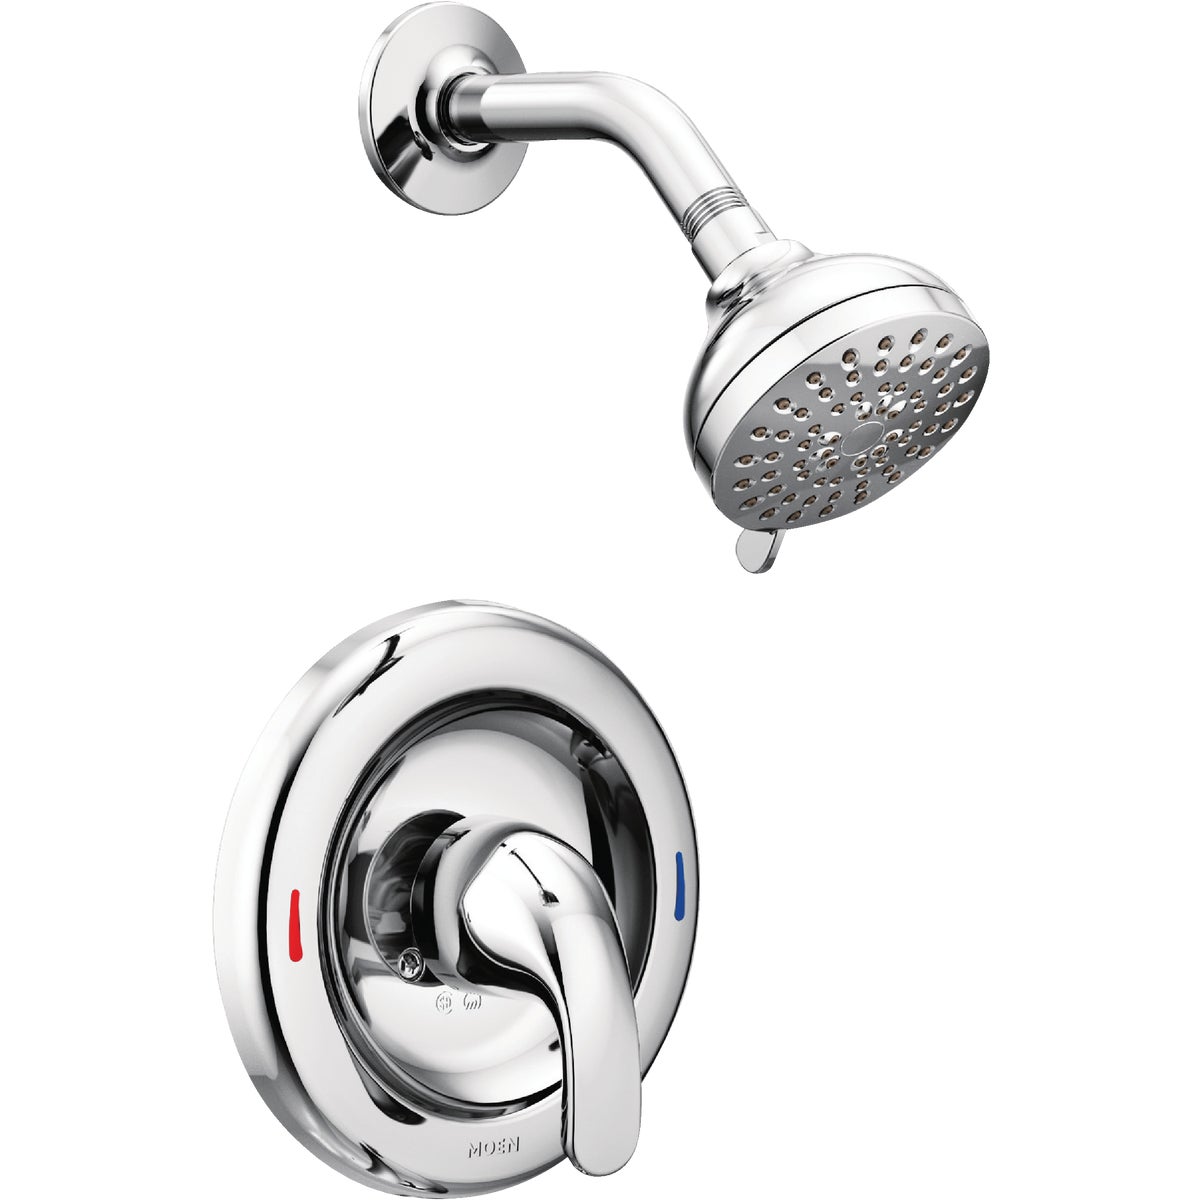 Item 400644, Adler single handle shower faucet with both lever handle and knob handle 